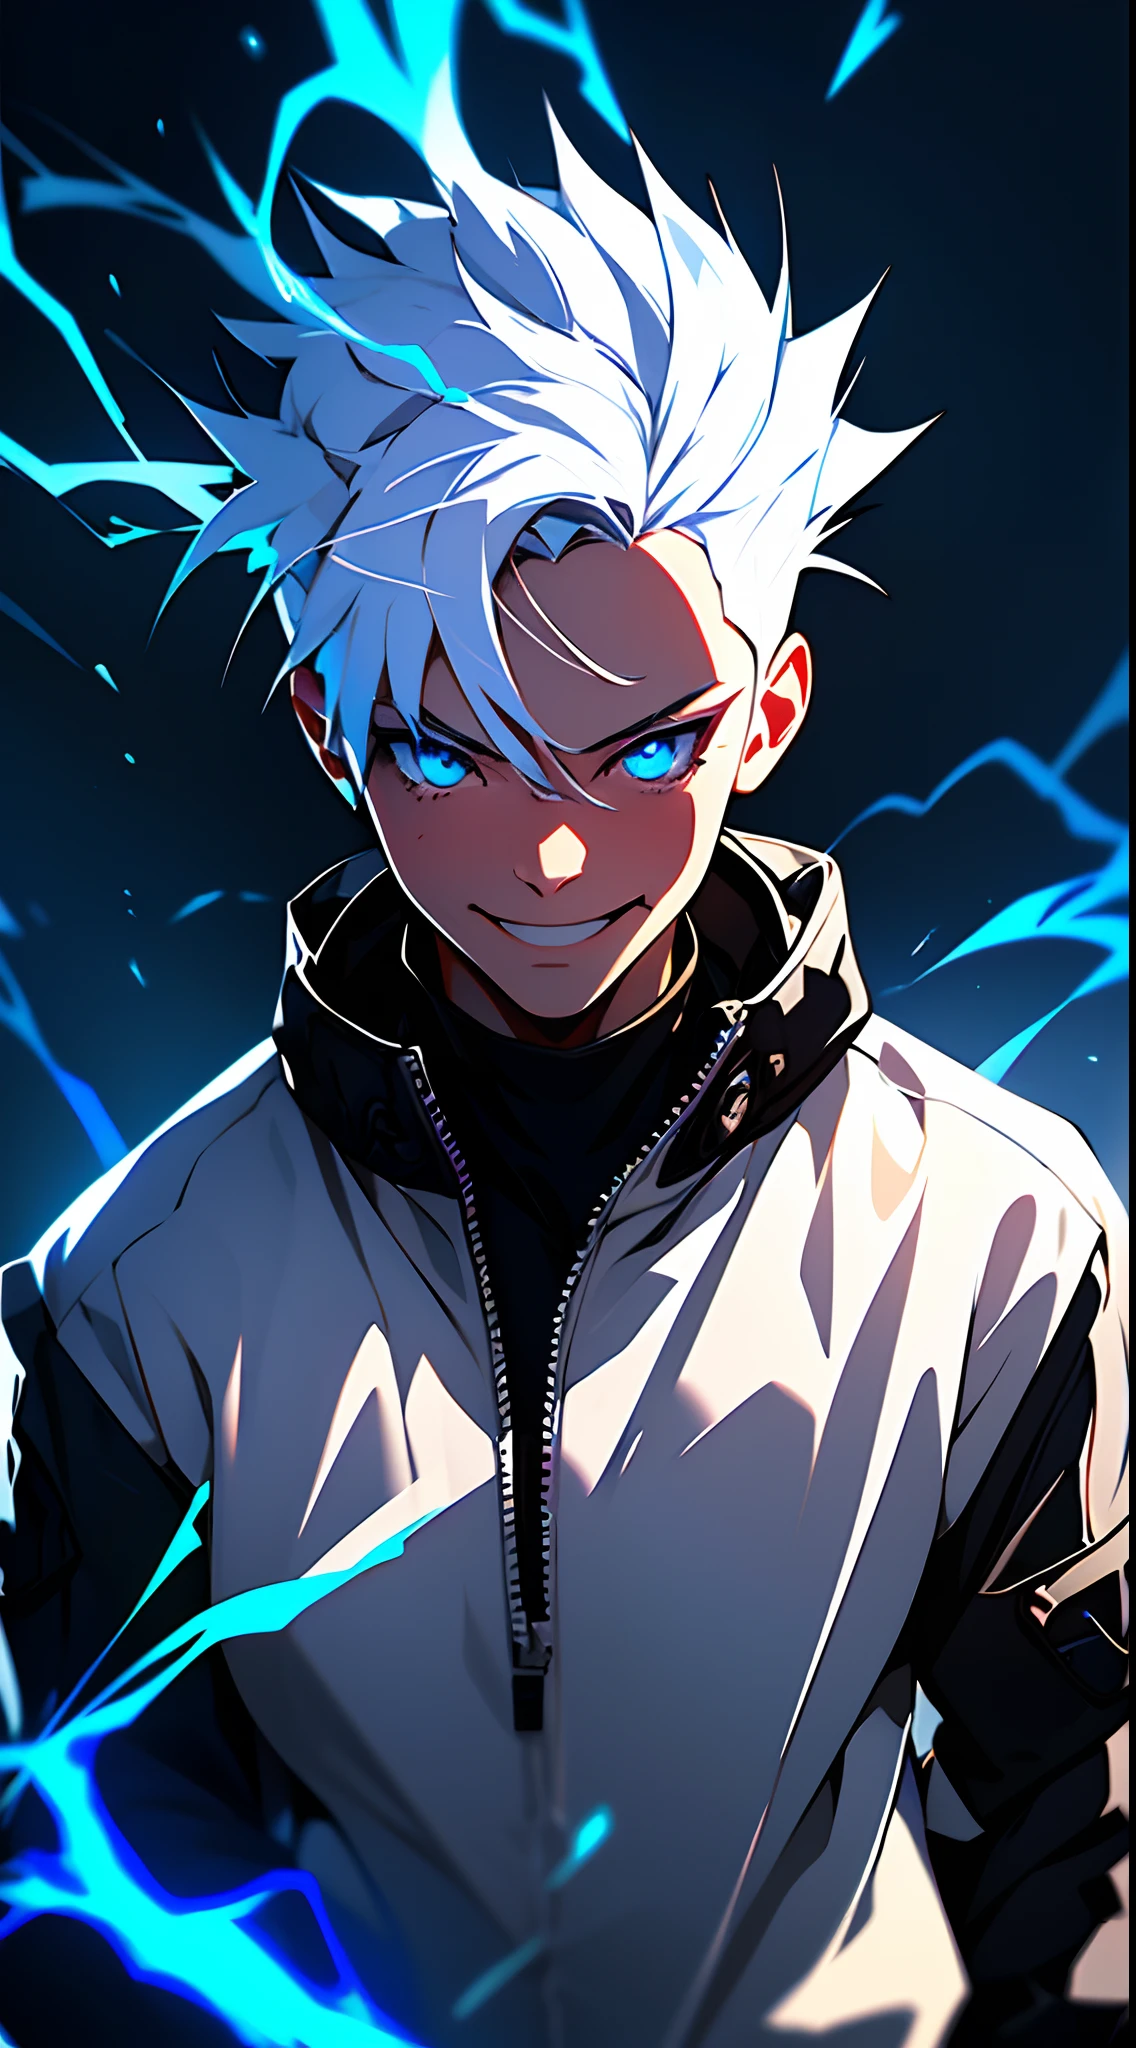 Masterpiece, 1boy, smiling, Anime boy wearing cyberpunk streetwear, white hair, blue eyes, The effect of electricity coming out of the body, dramatic background, dinamic lighting, vivid colours, style by makato shinkai.